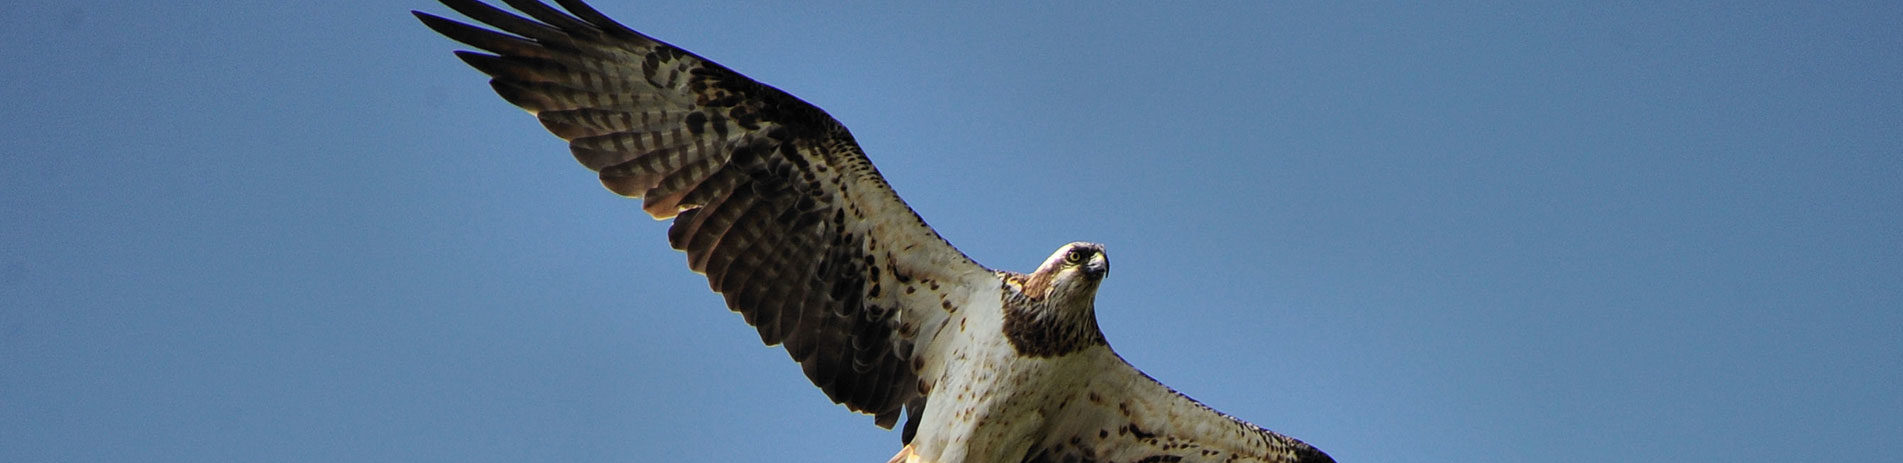 flying-osprey-with-wings-spread-and-blue-sky-behind